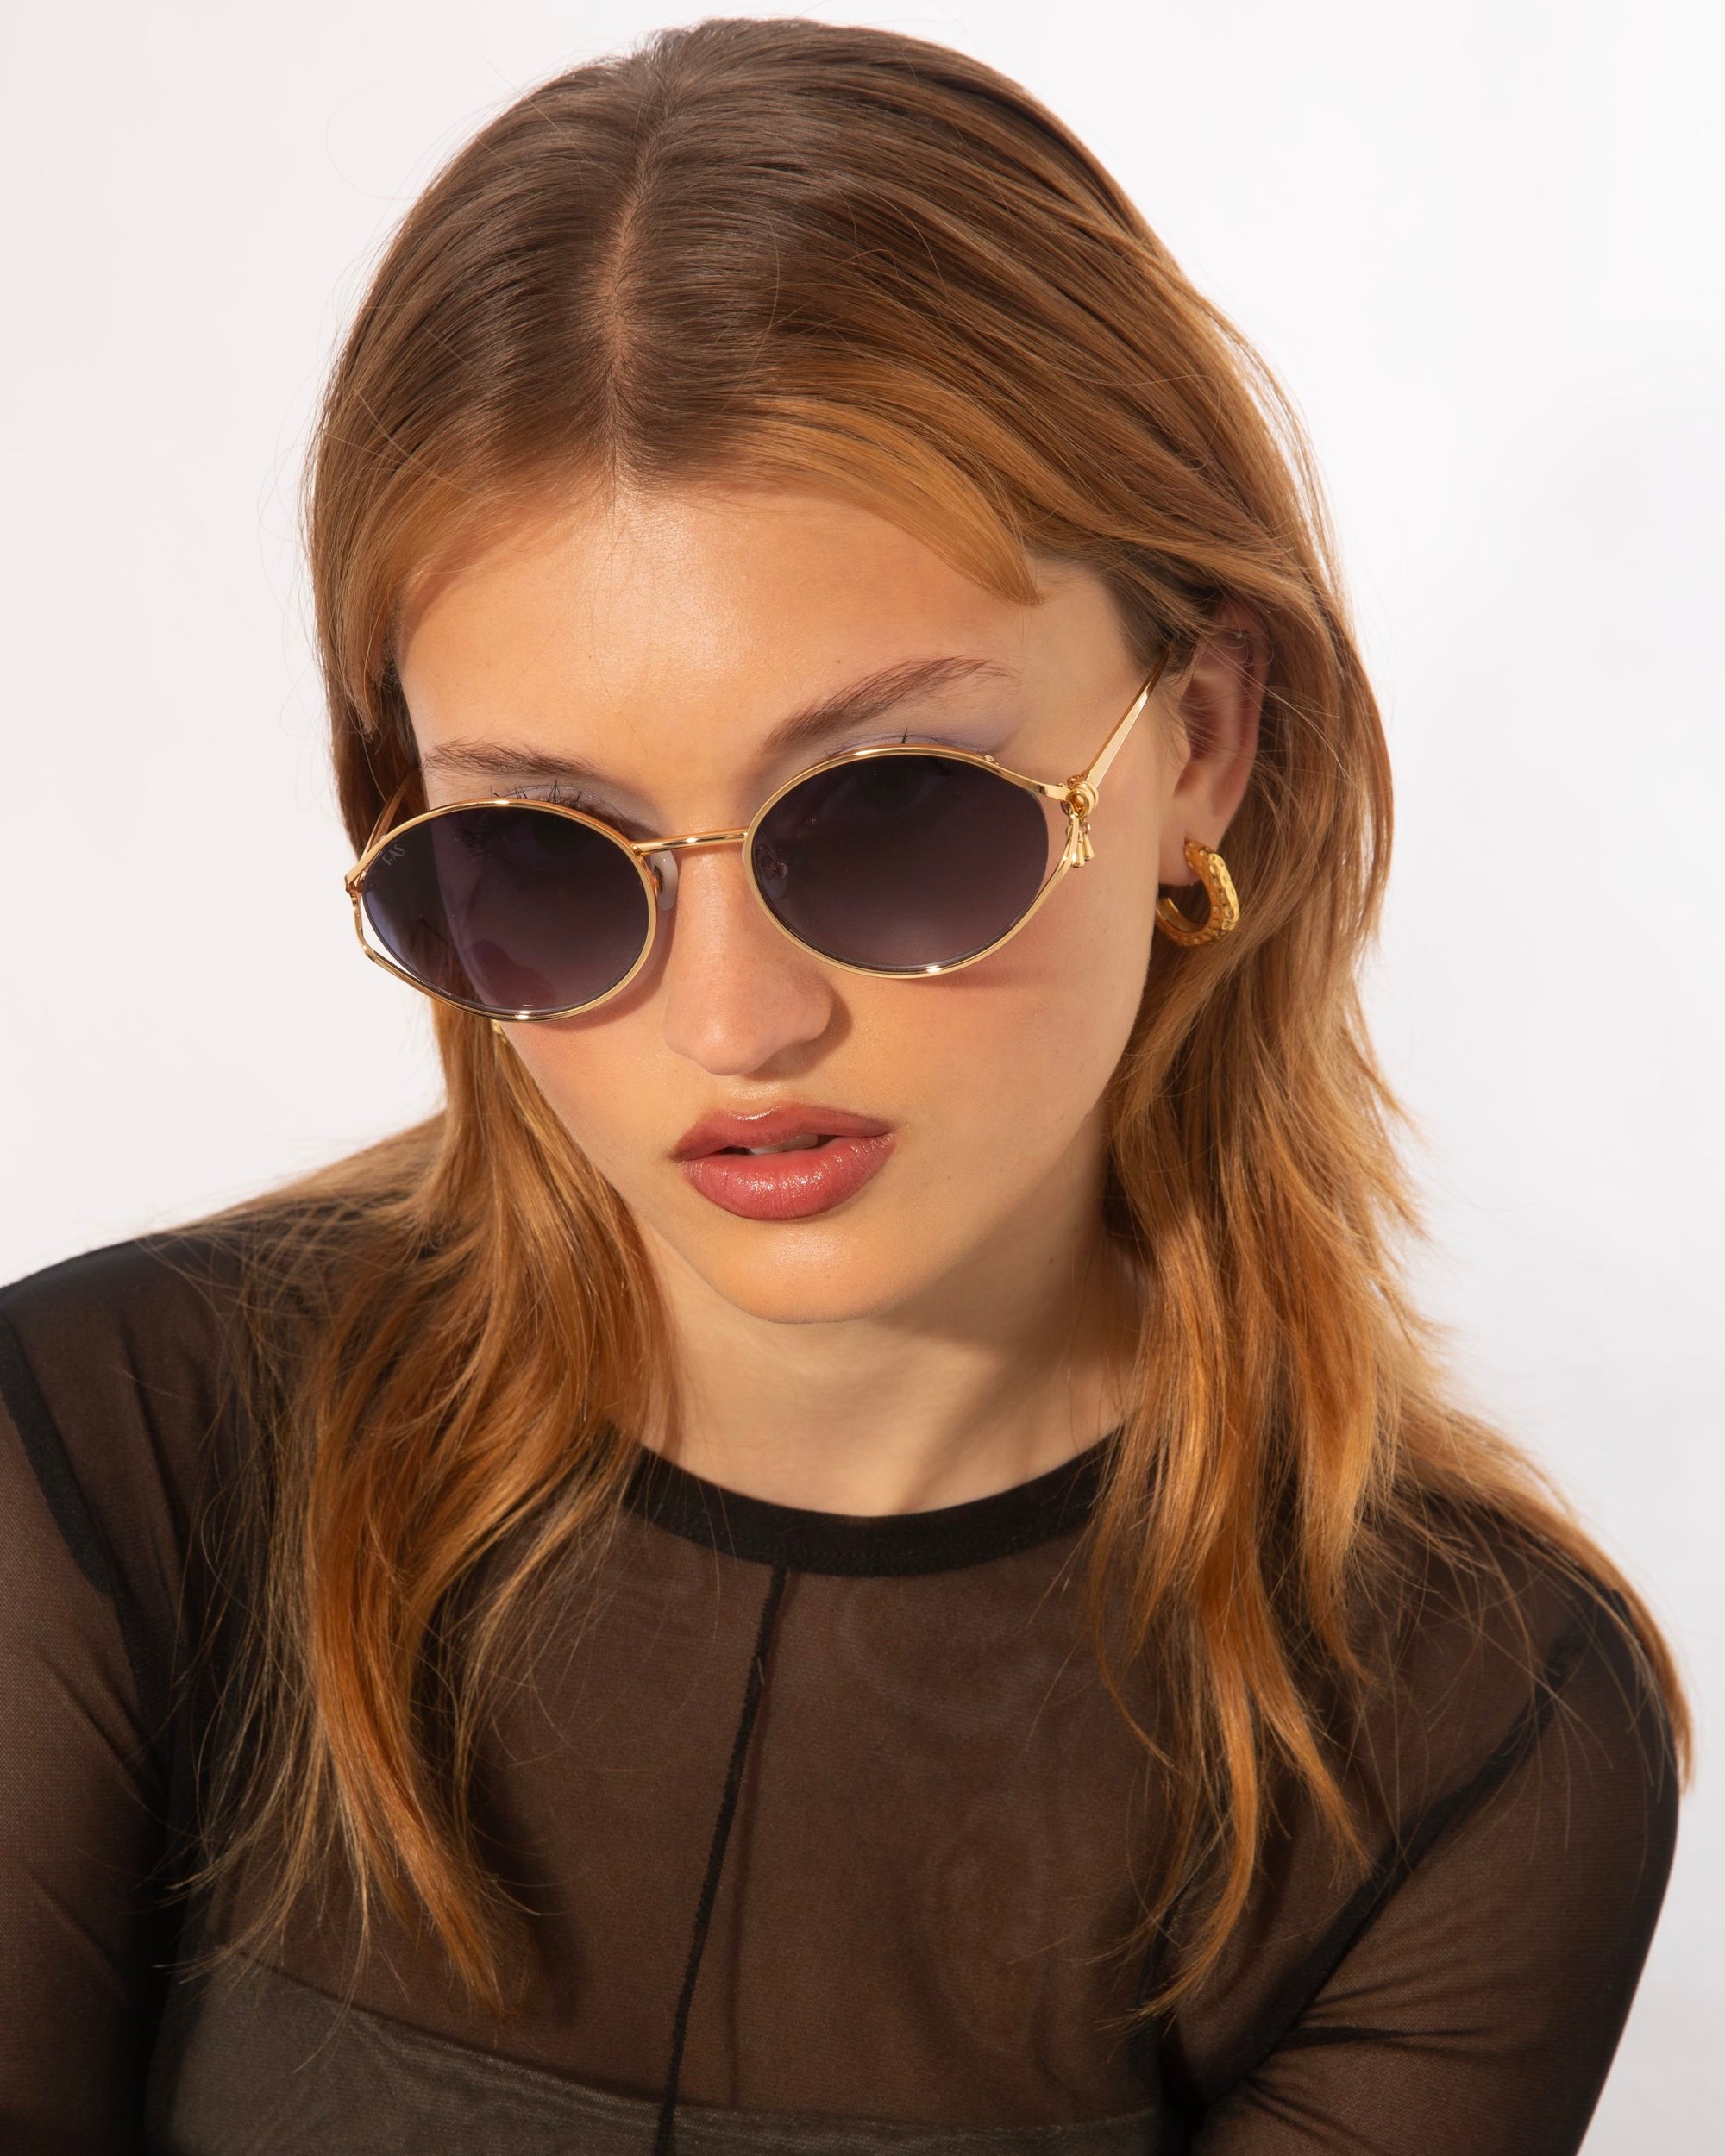 A person with long, light brown hair is wearing round Sky sunglasses by For Art&#39;s Sake® featuring jade-stone nose pads and 18-karat gold plating, along with small gold hoop earrings. They are dressed in a black, semi-sheer top and looking slightly downward against a plain white background.